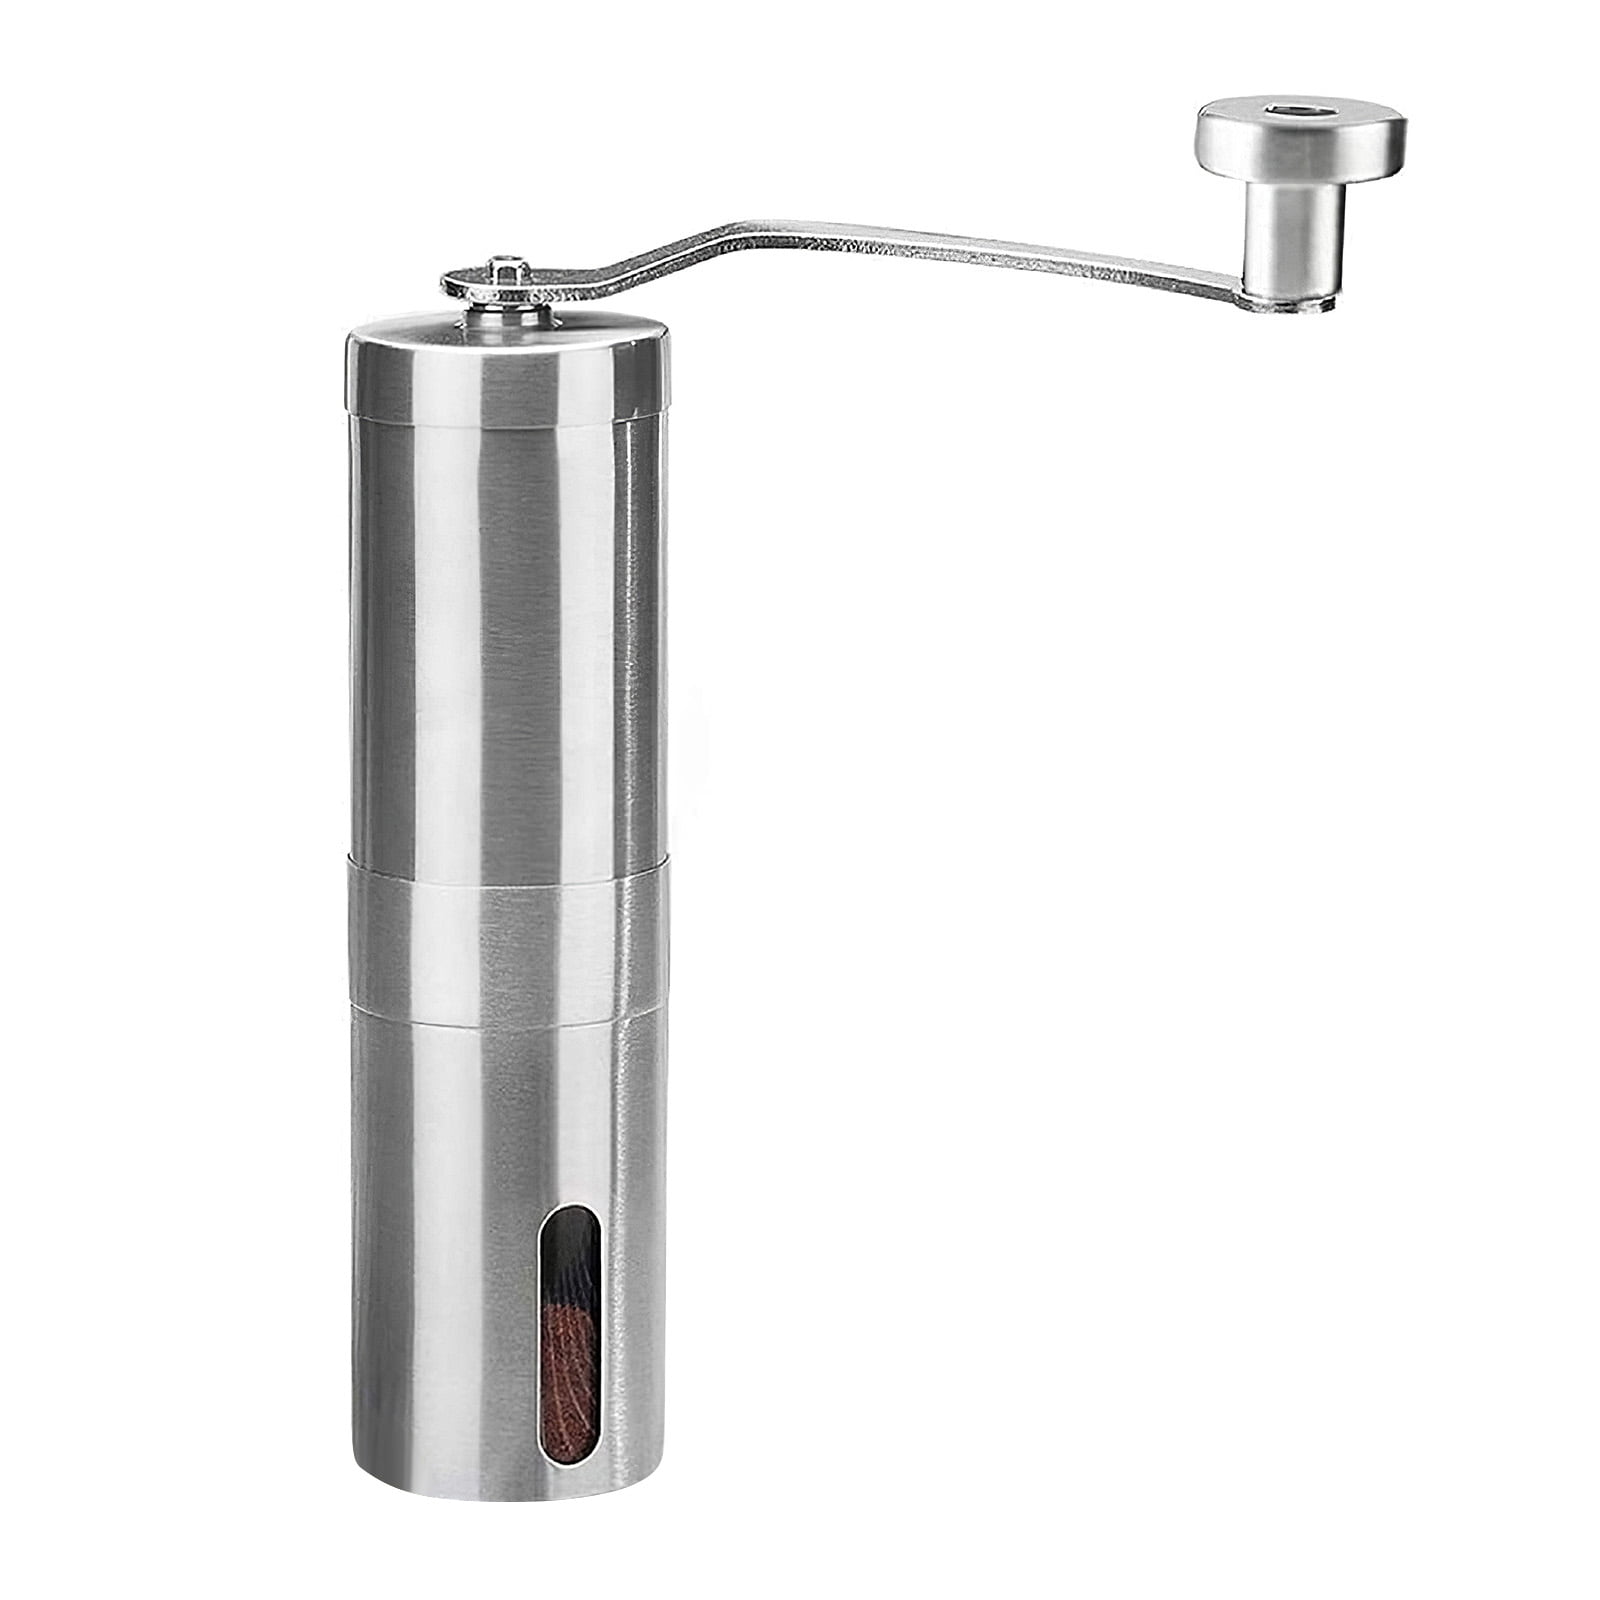 Details about   Portable Stainless Steel Manual Coffee Grinder Household Coffe Bean Mill Kitchen 